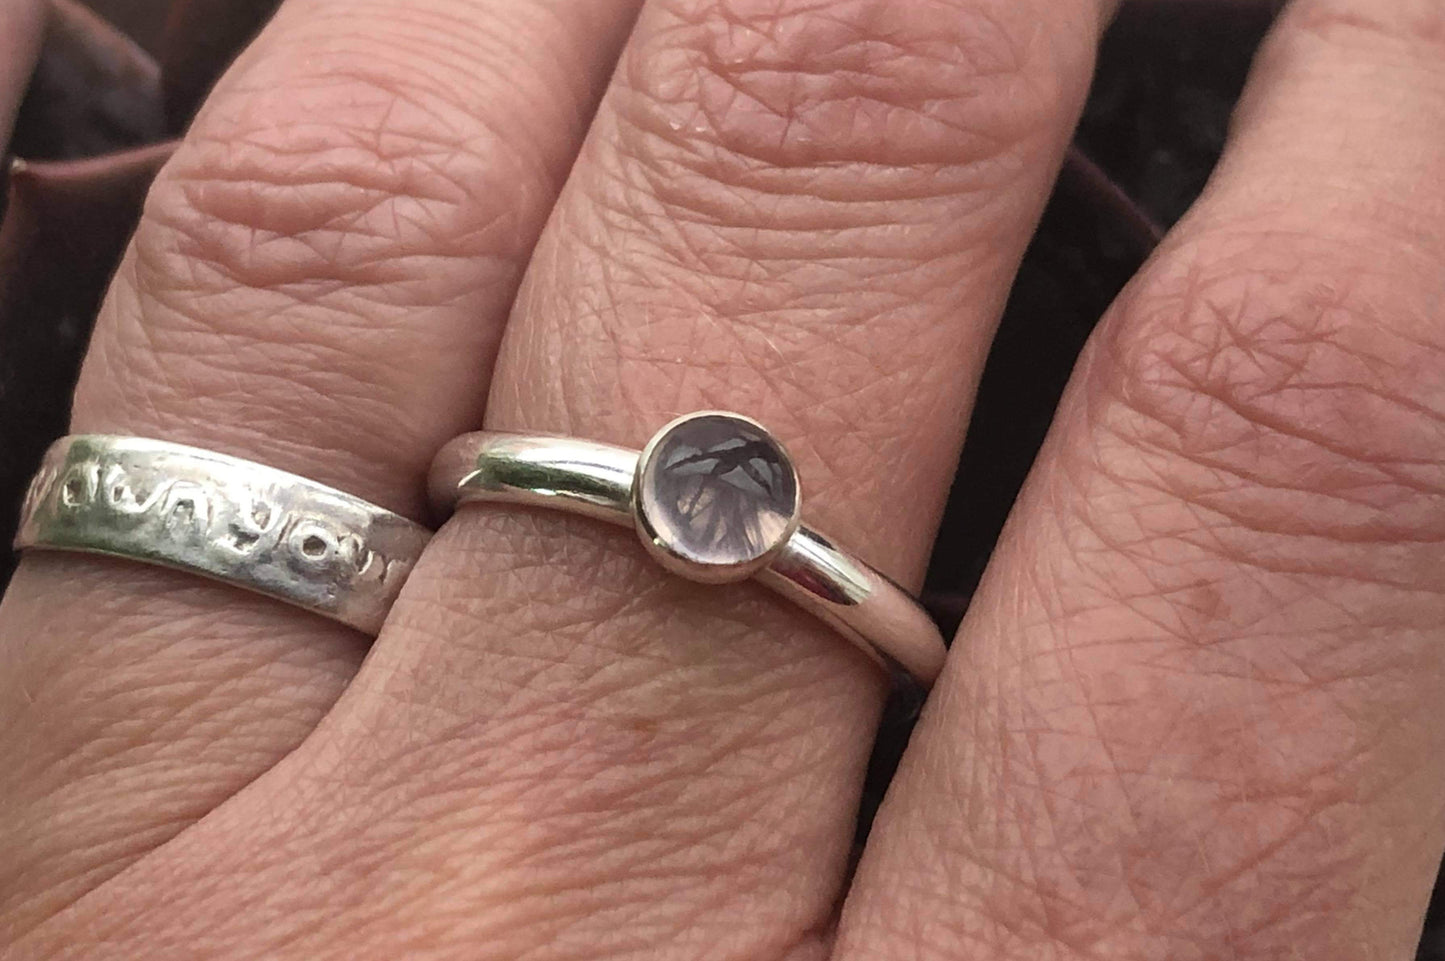 The 'Aurora' sterling silver hair ring